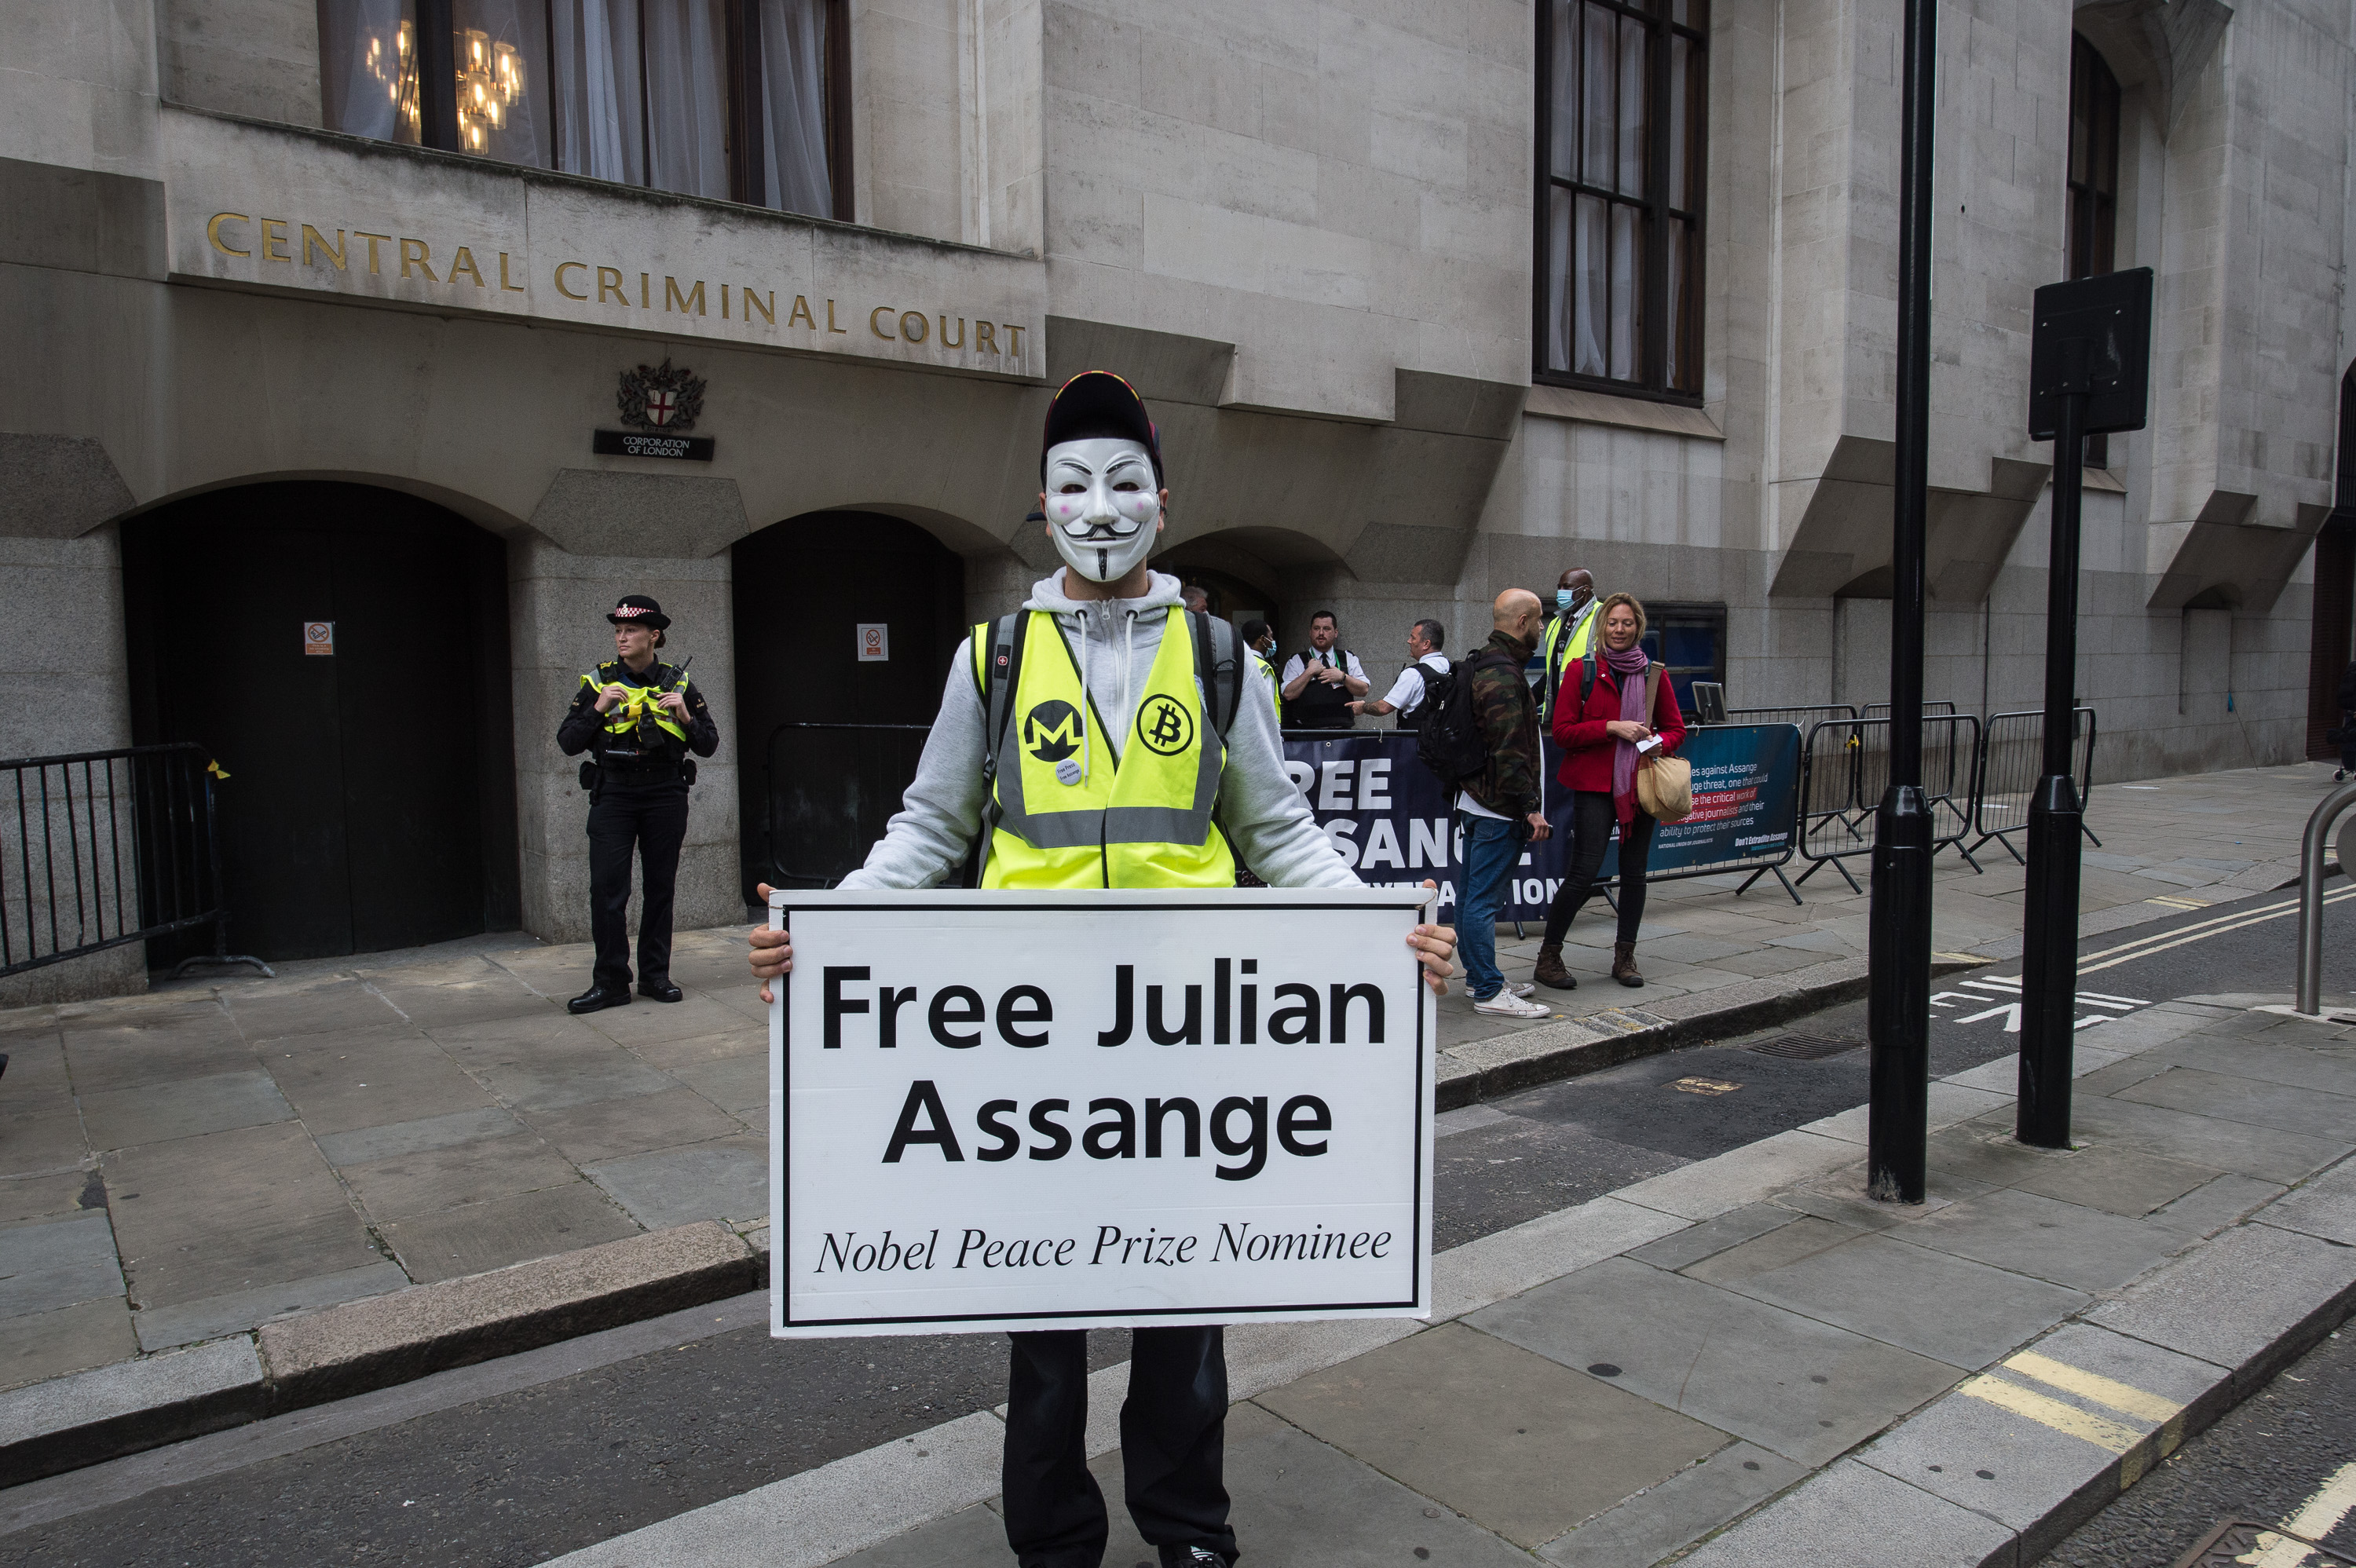 Assange Extradition Hearing Photos: September 07, 2020